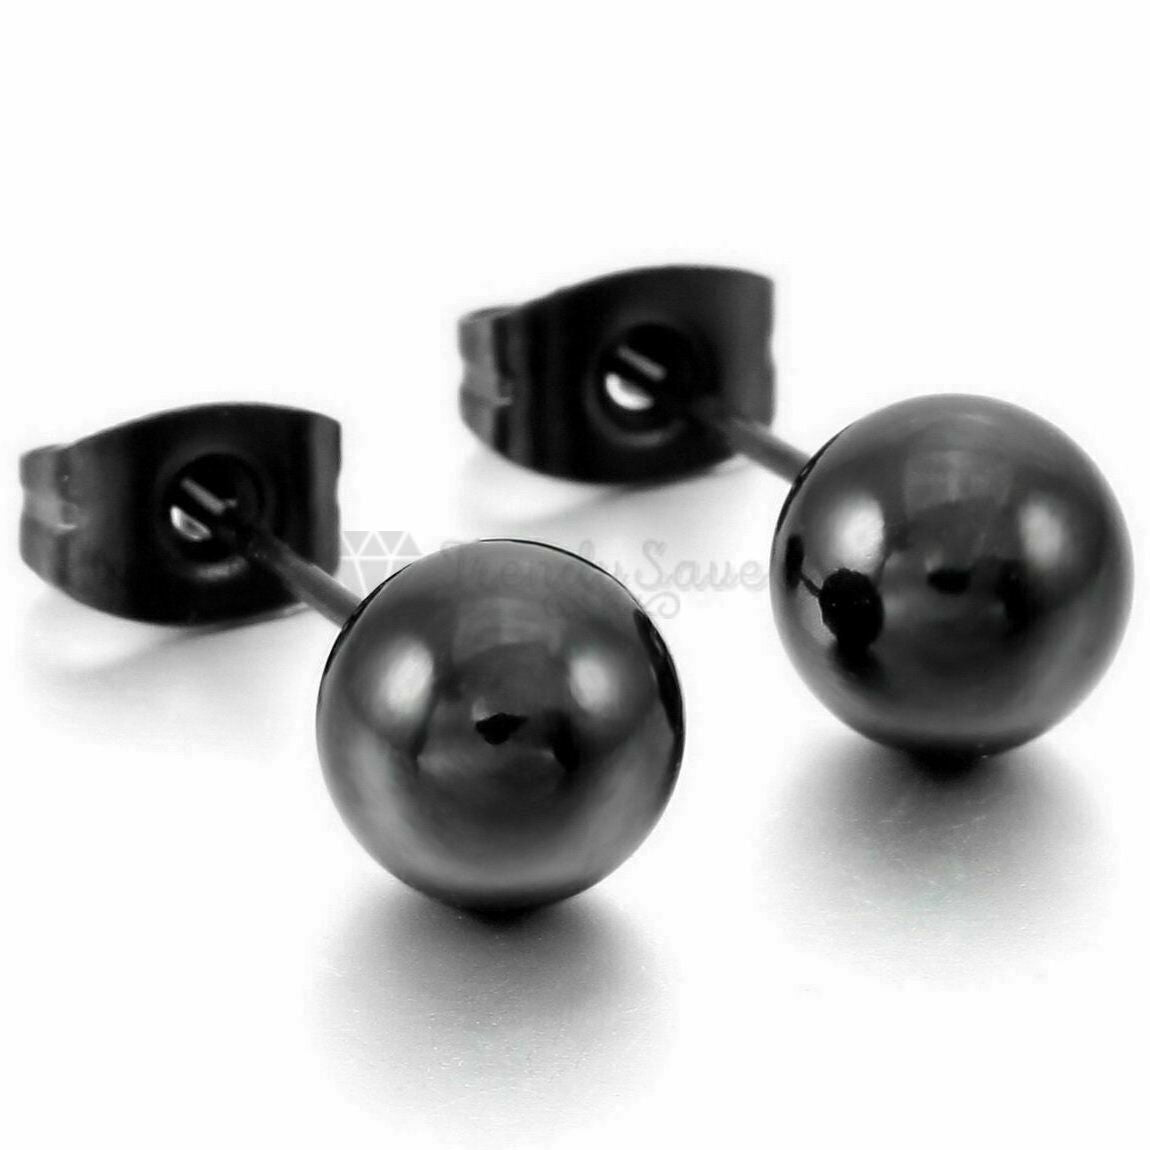 6MM Classic Punk Stainless Steel Round Black Cartilage Ball Ear Studs Earrings